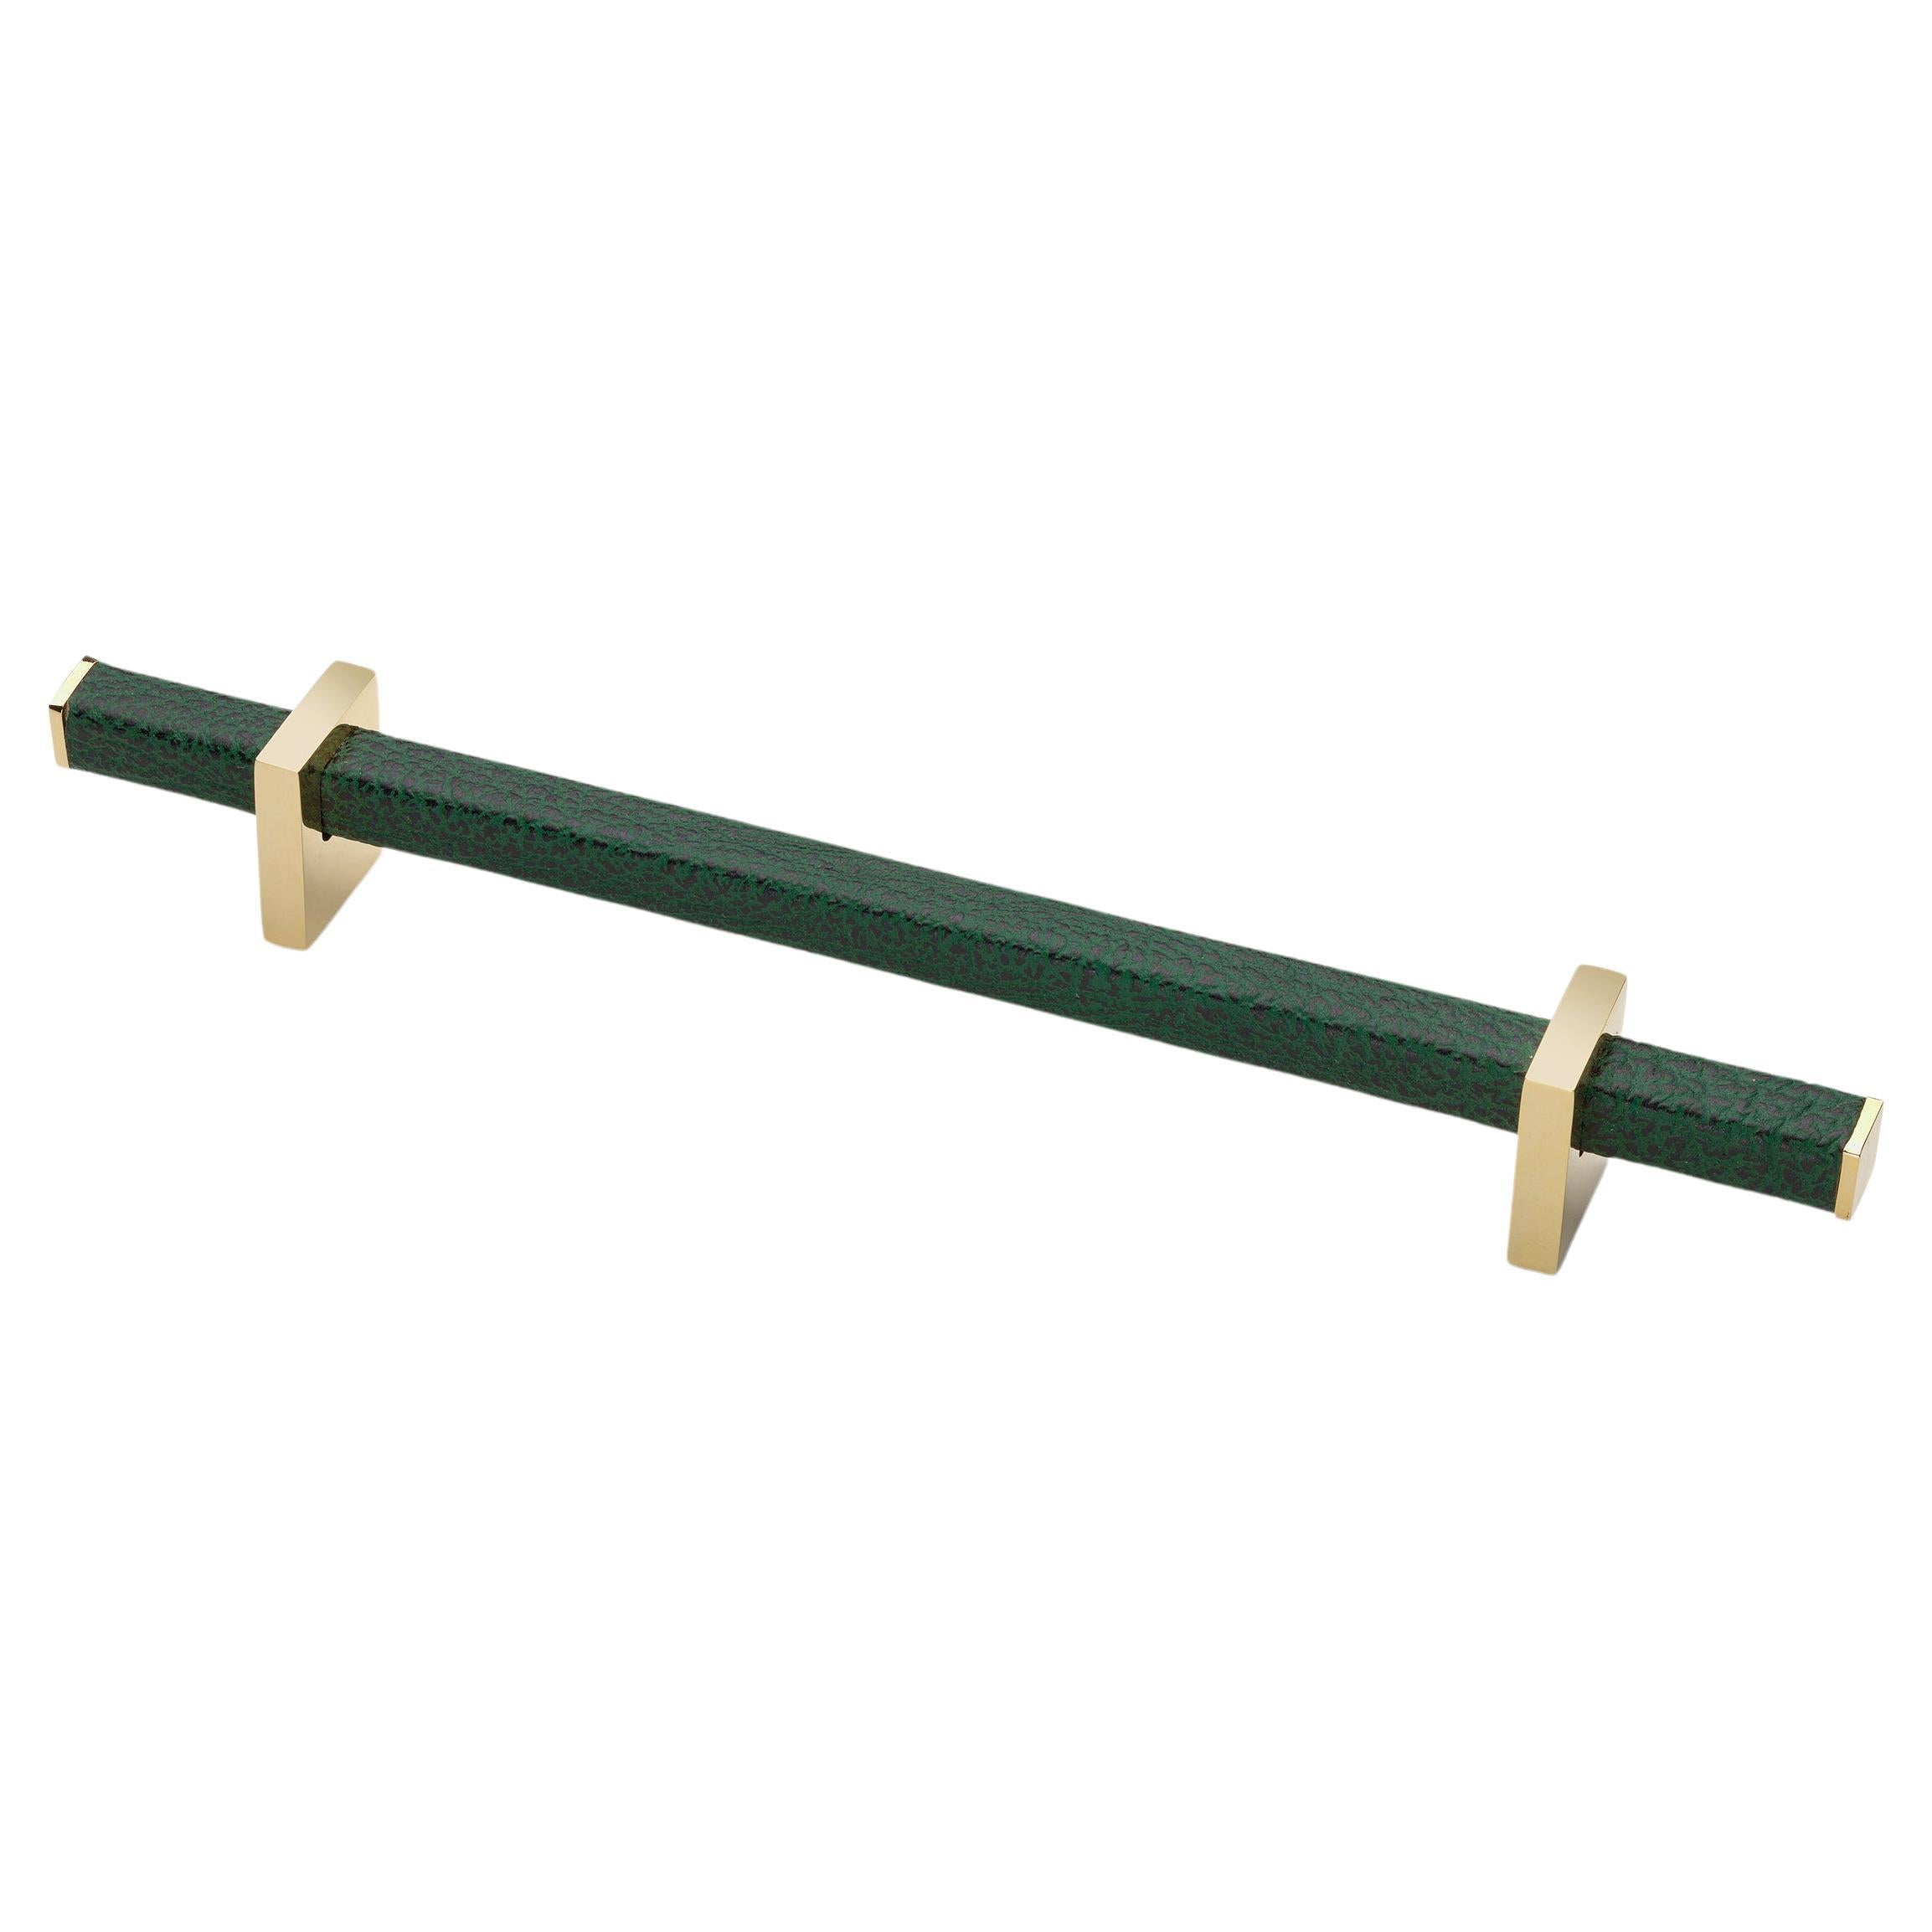 Luxury Pull Handle, Various Metal & Leather Color Finishes Classic Shape. Brass